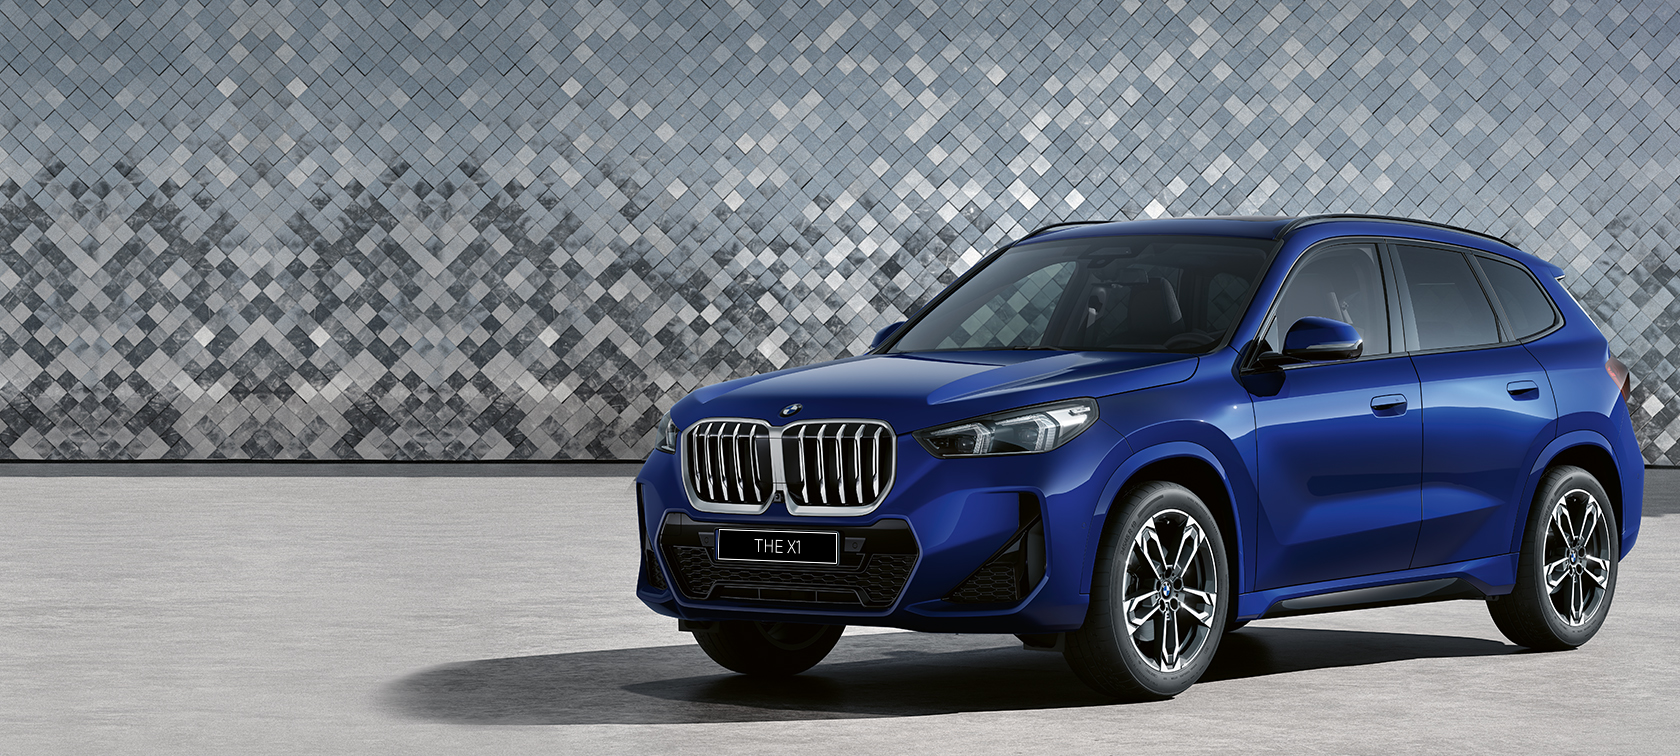 THE ALL-NEW BMW X1